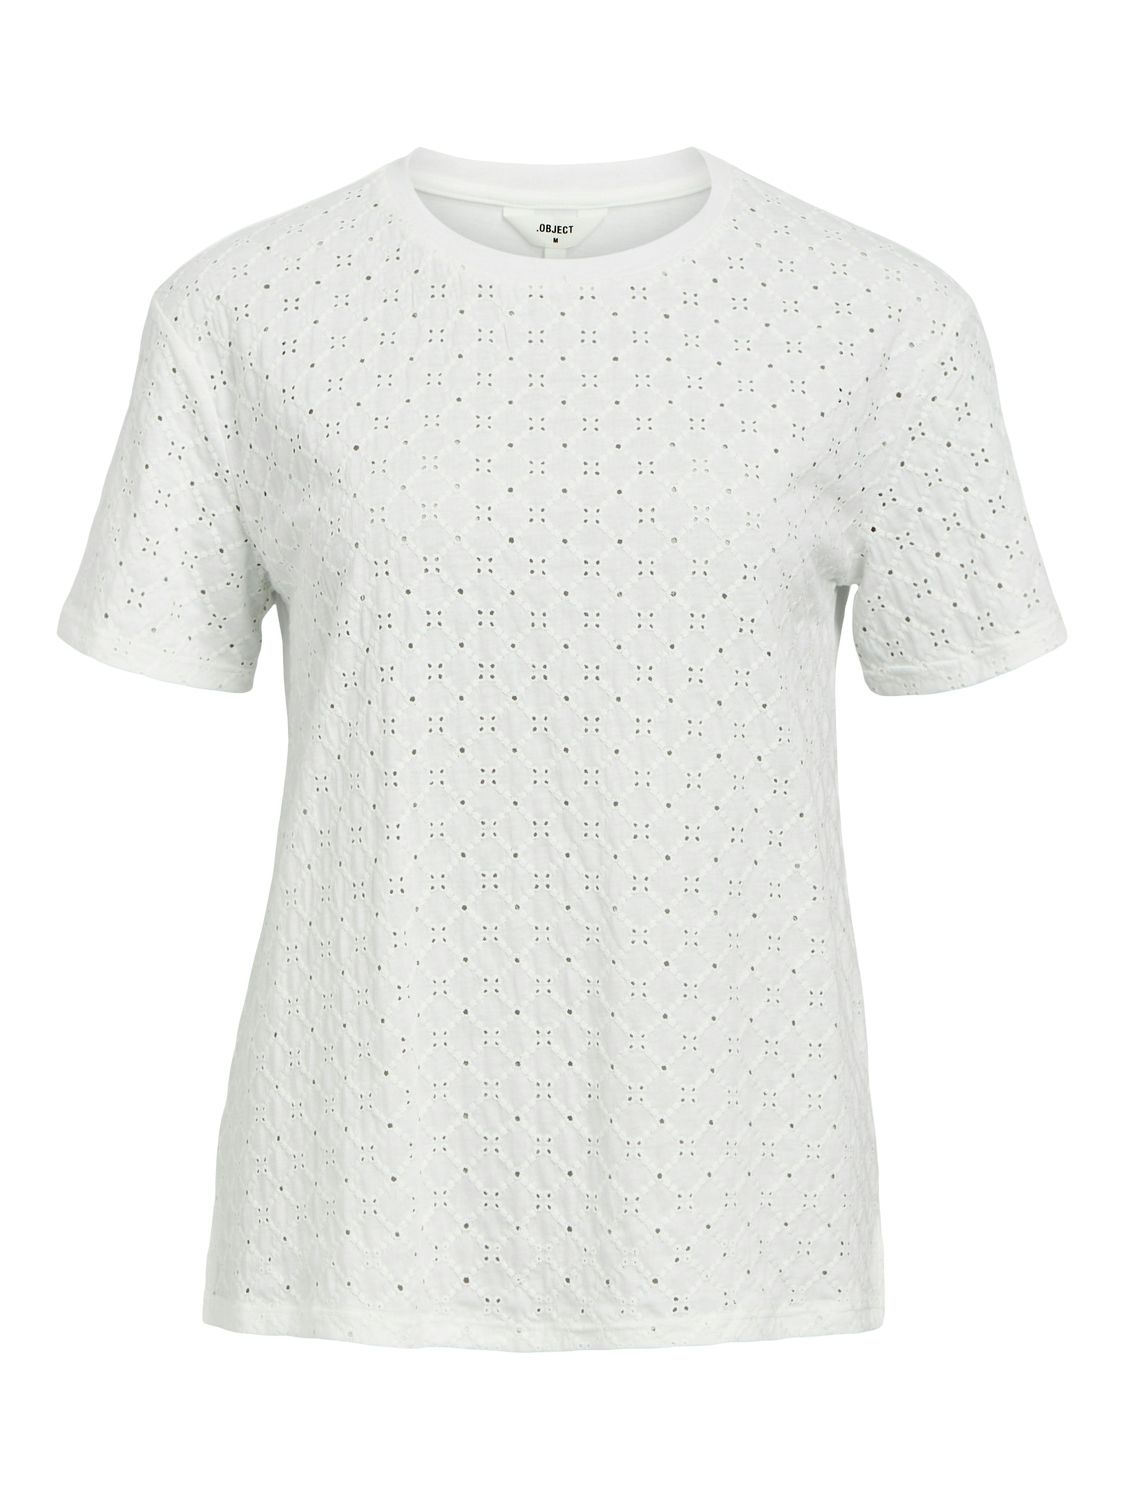 Object OBJIA RE SS T-SHIRT 133 White 2900147928039